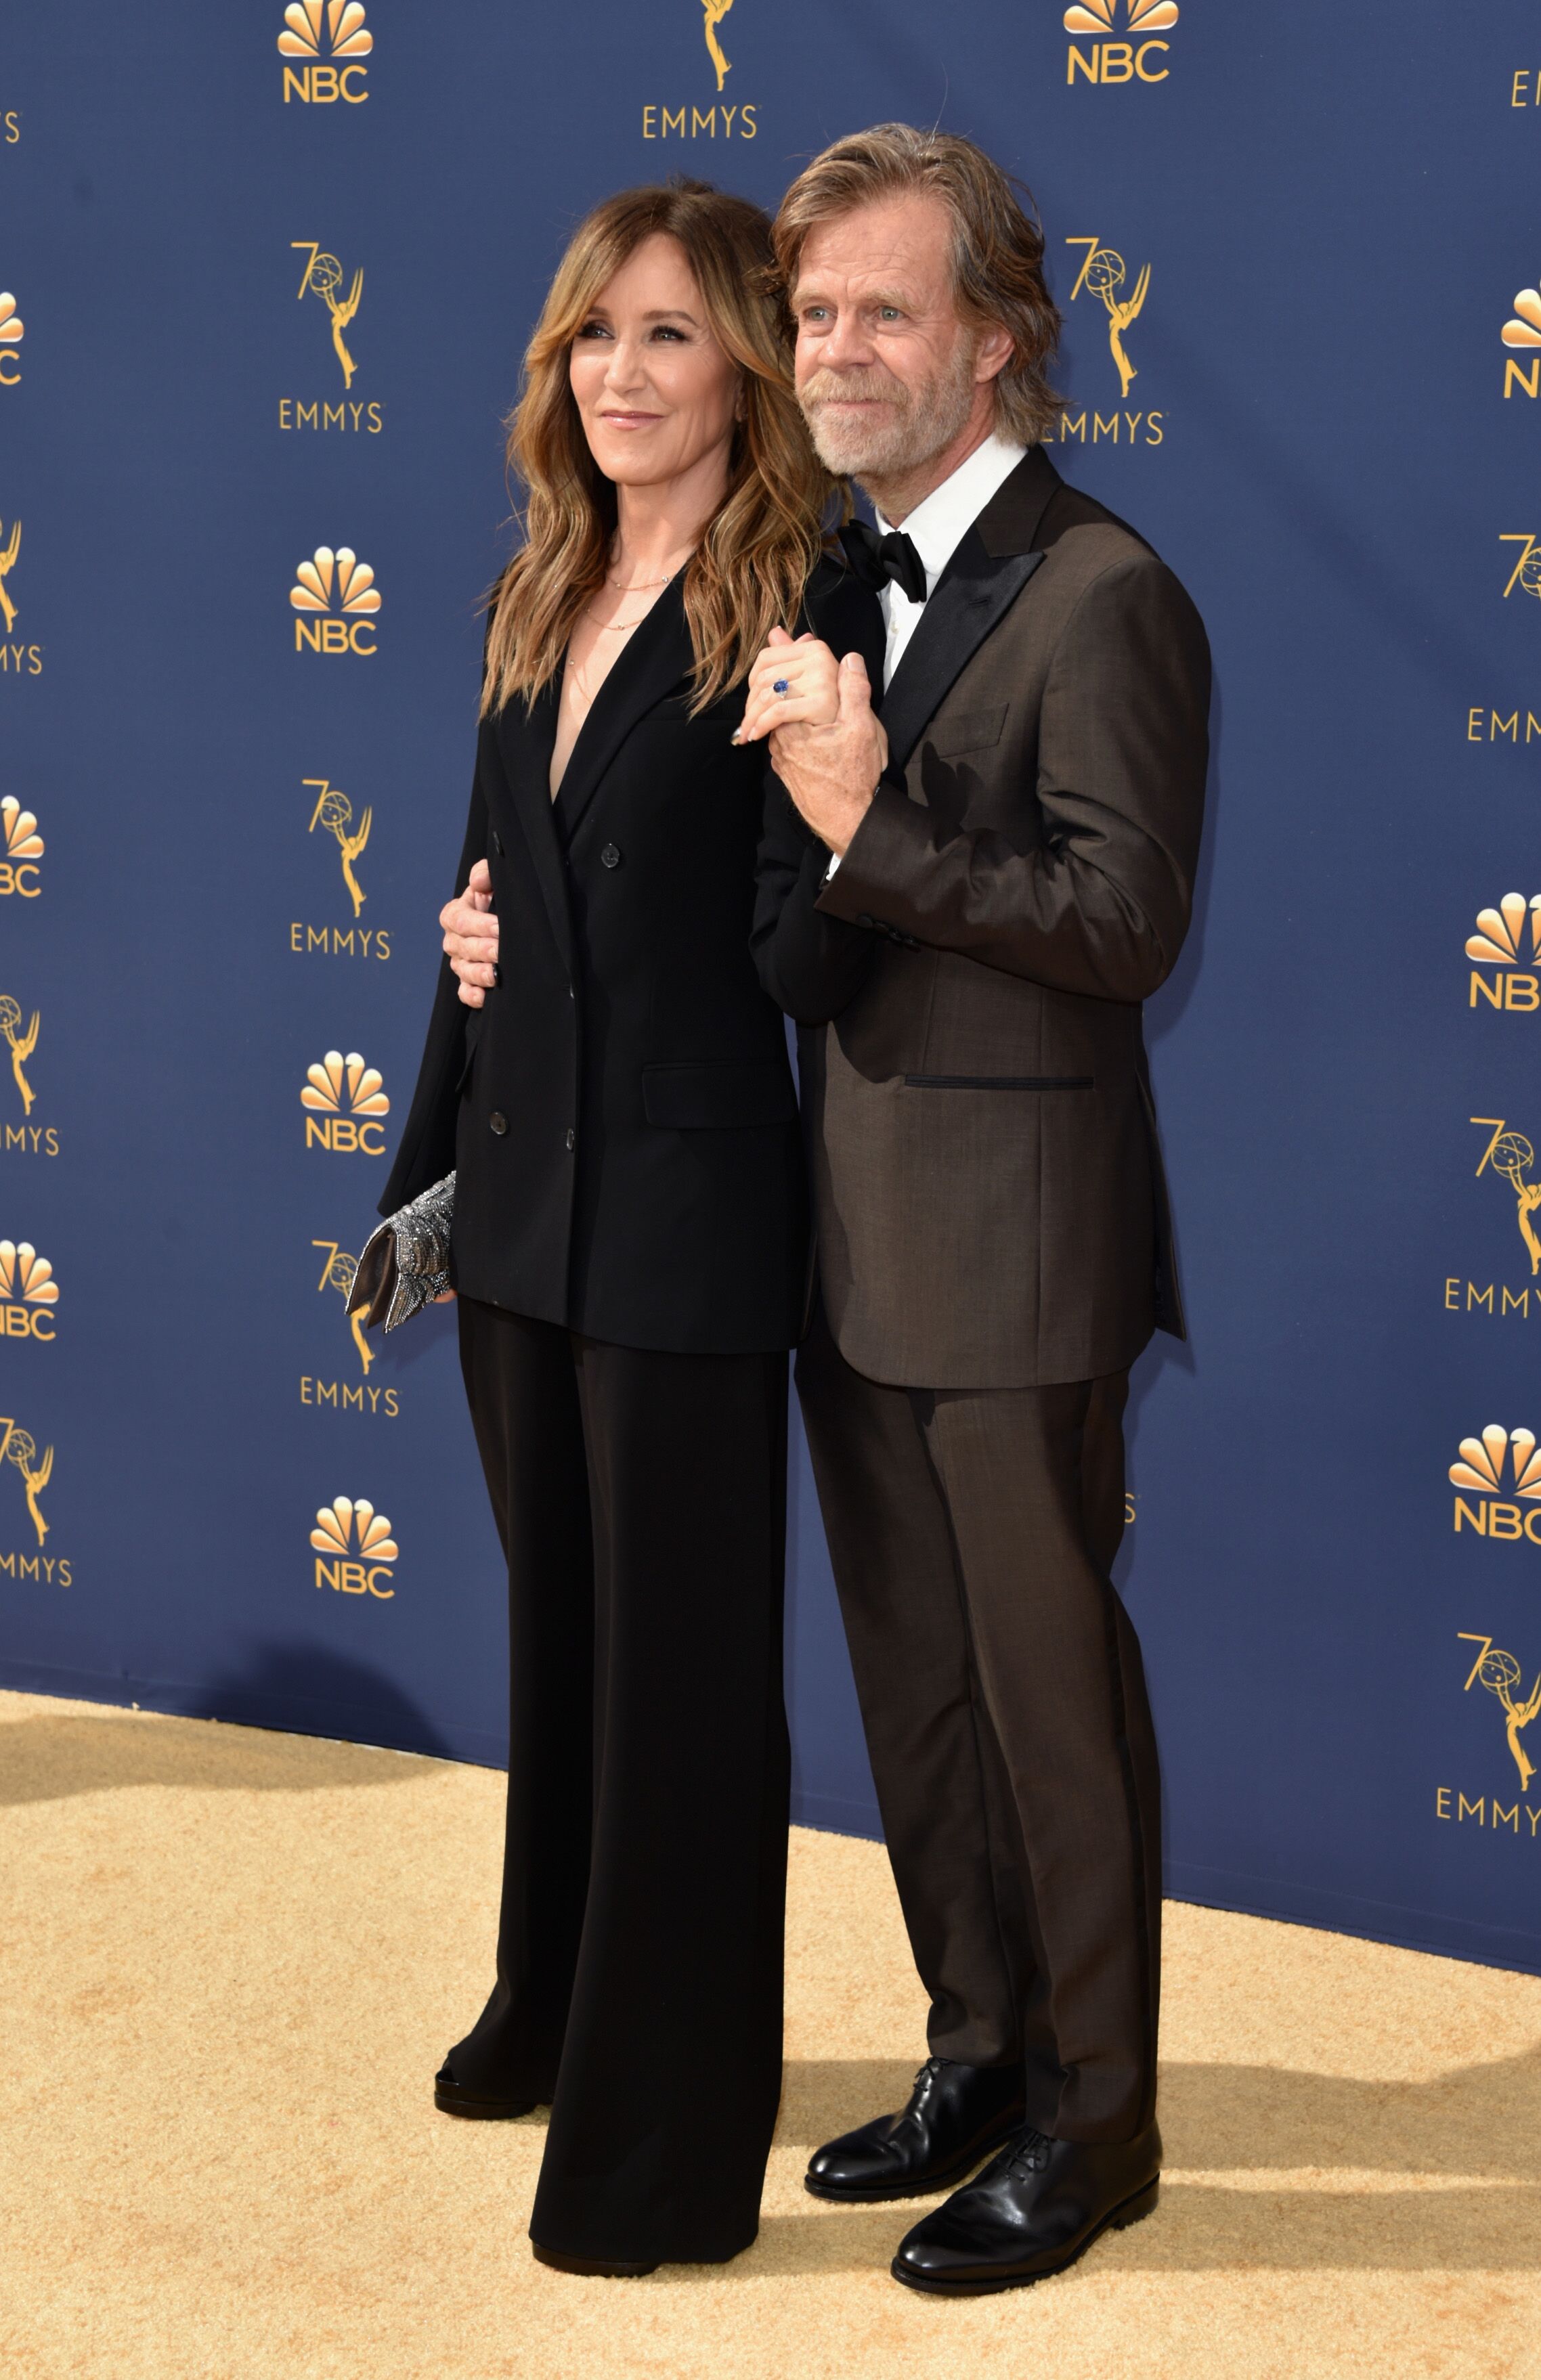 Felicity Huffman and William H. Macy at the 70th Emmy Awards on September 17, 2018 | Photo: Getty Images